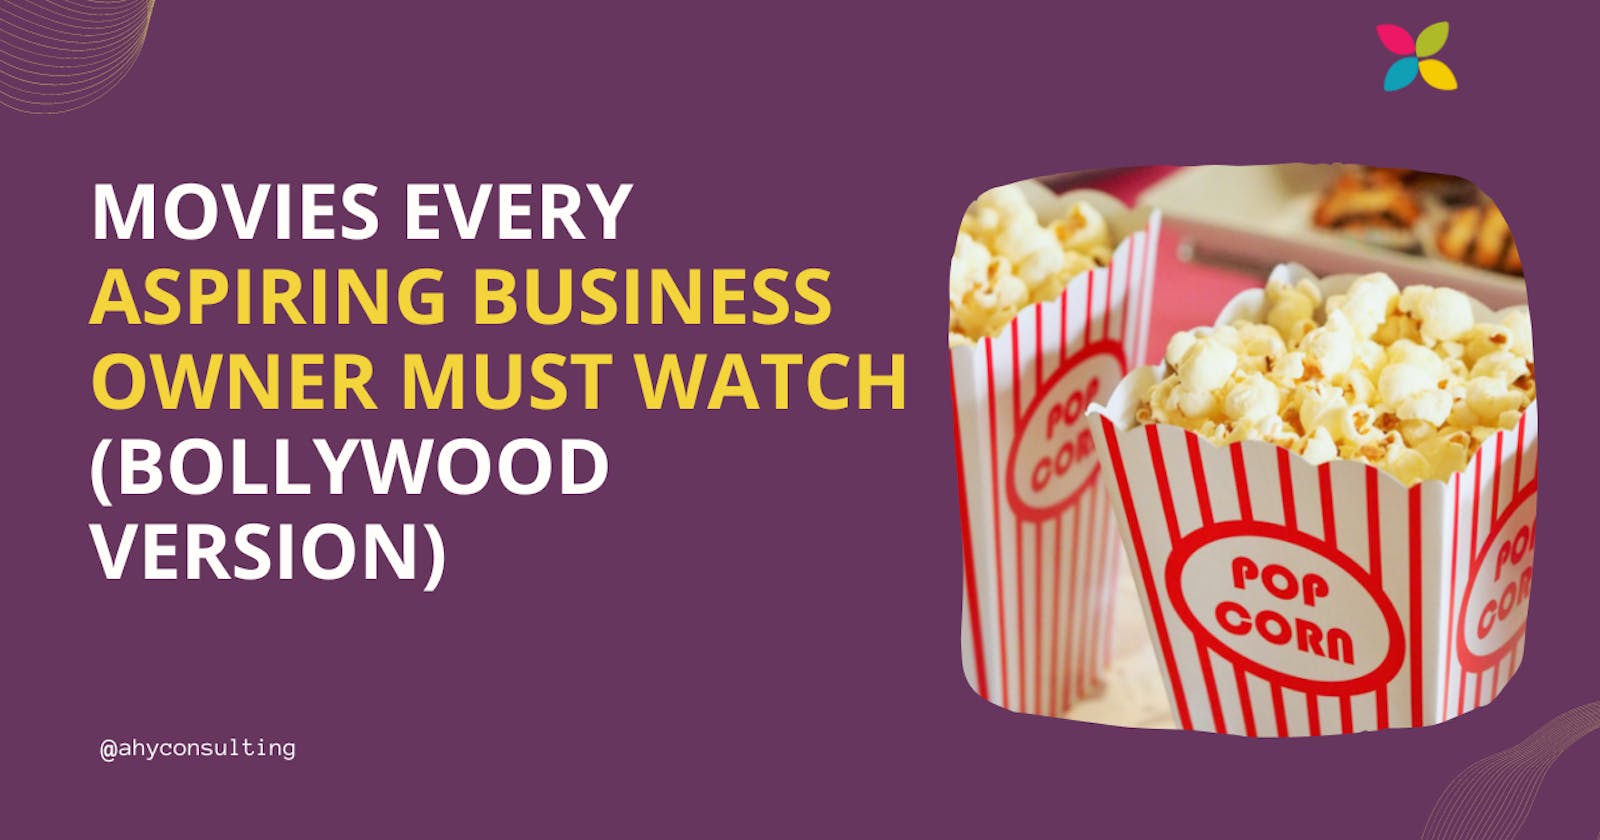 Movies every aspiring business owner must watch (Bollywood version)